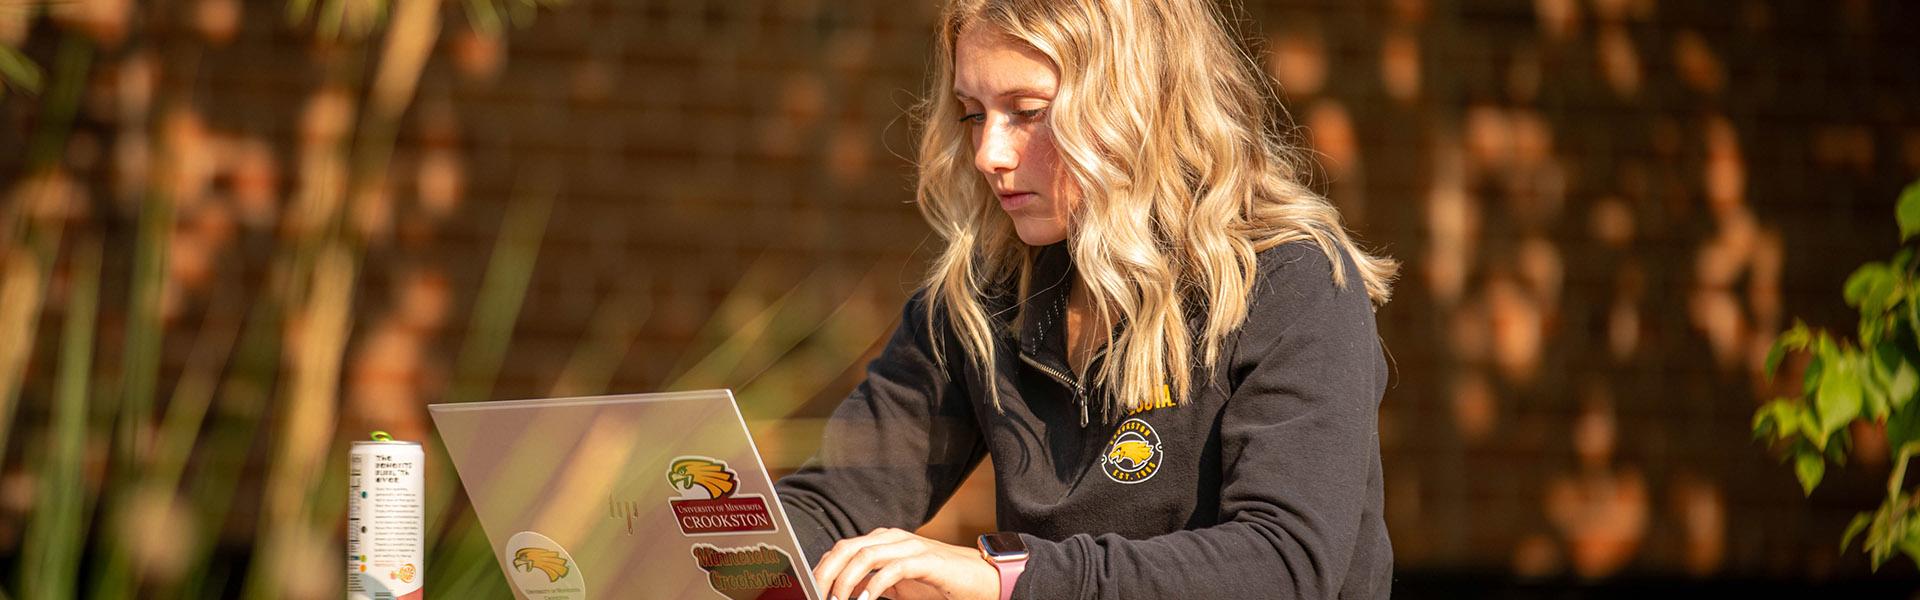 Female student sitting outside on her laptop during the fall